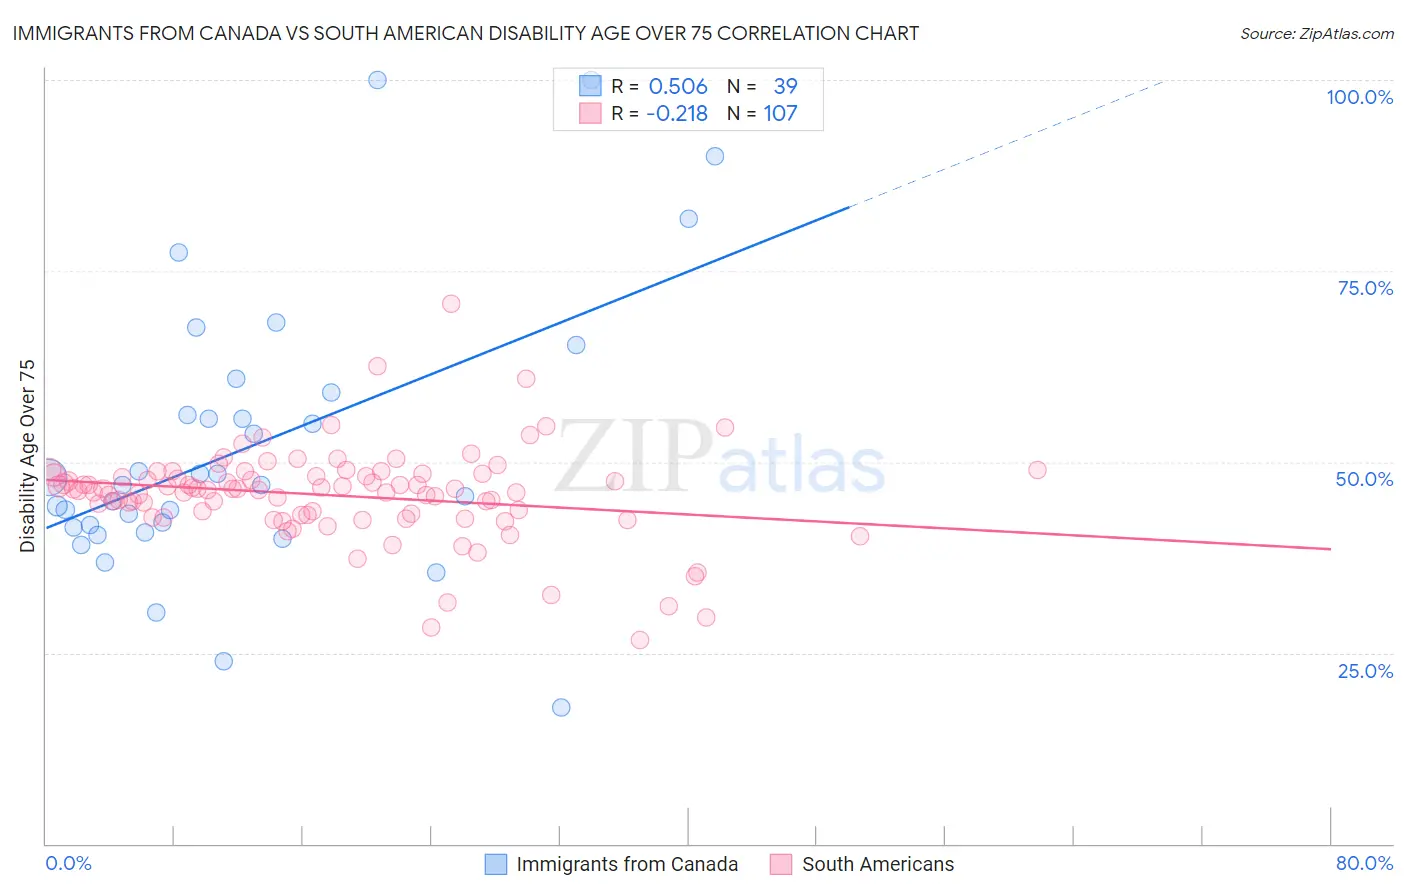 Immigrants from Canada vs South American Disability Age Over 75